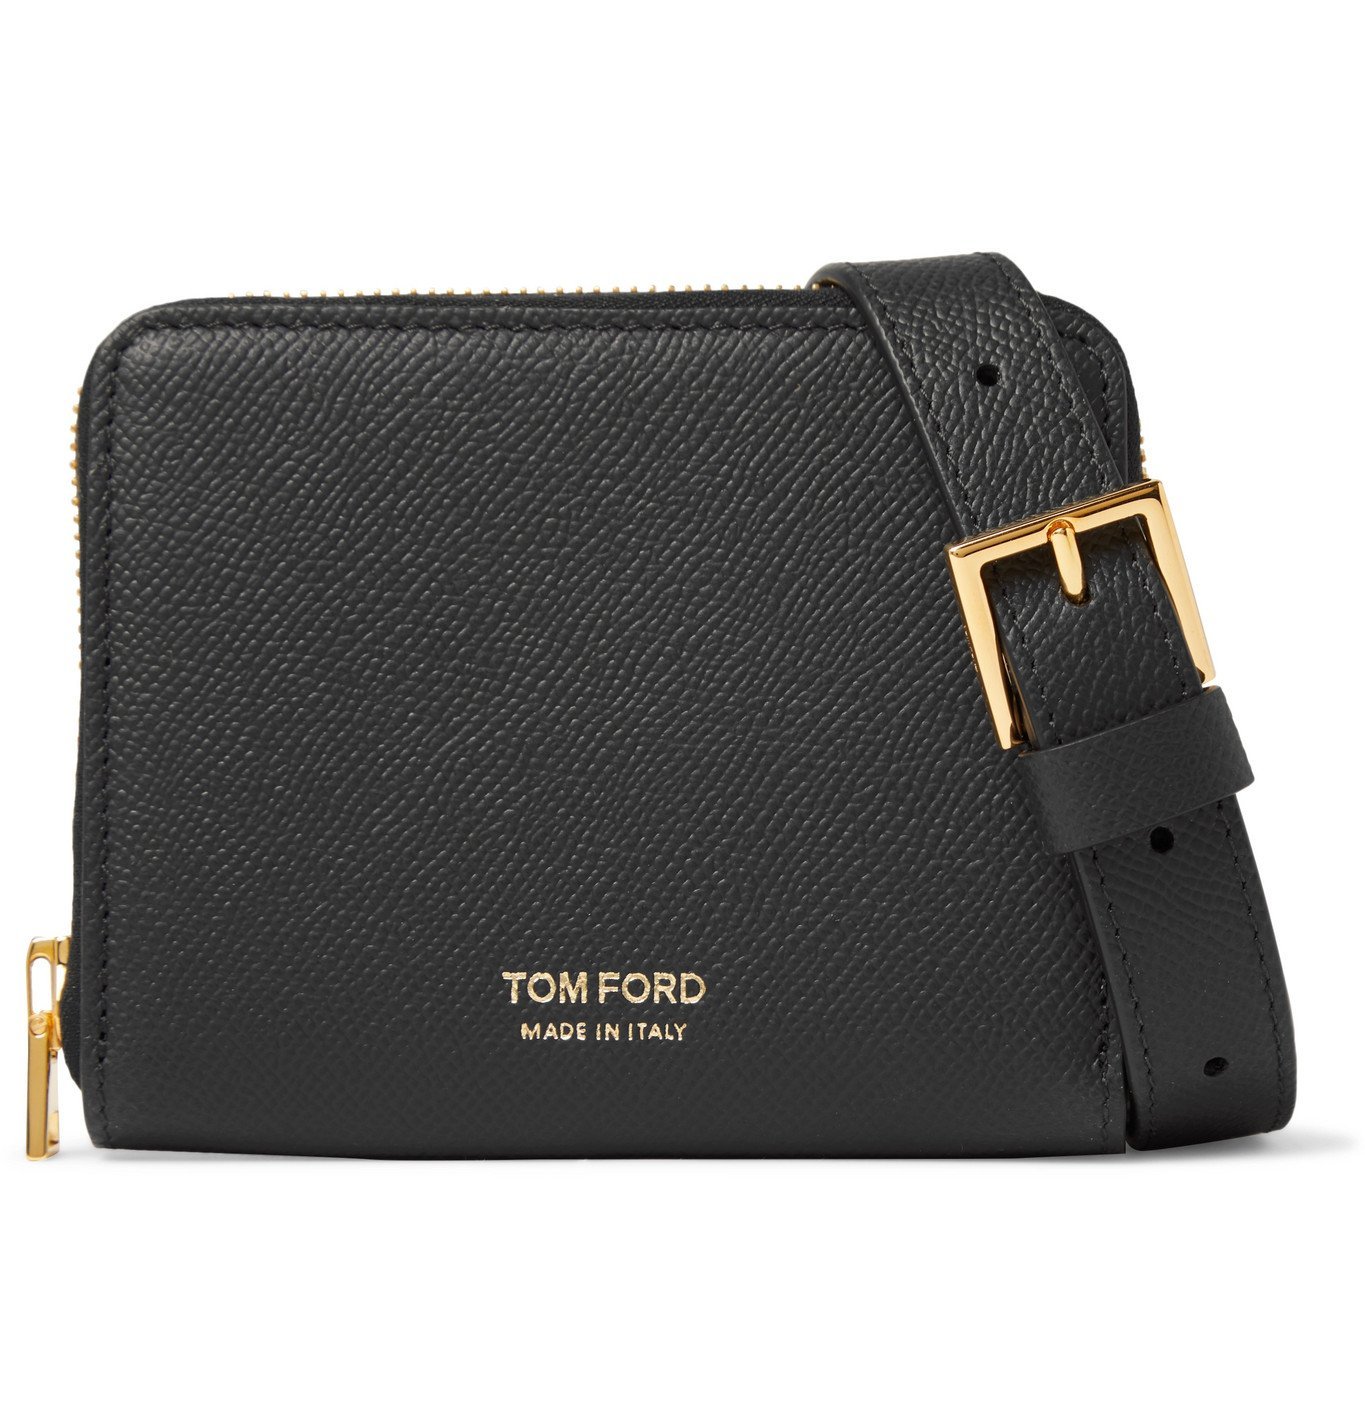 TOM FORD - Full-Grain Leather Zip-Around Wallet with Lanyard - Black TOM  FORD